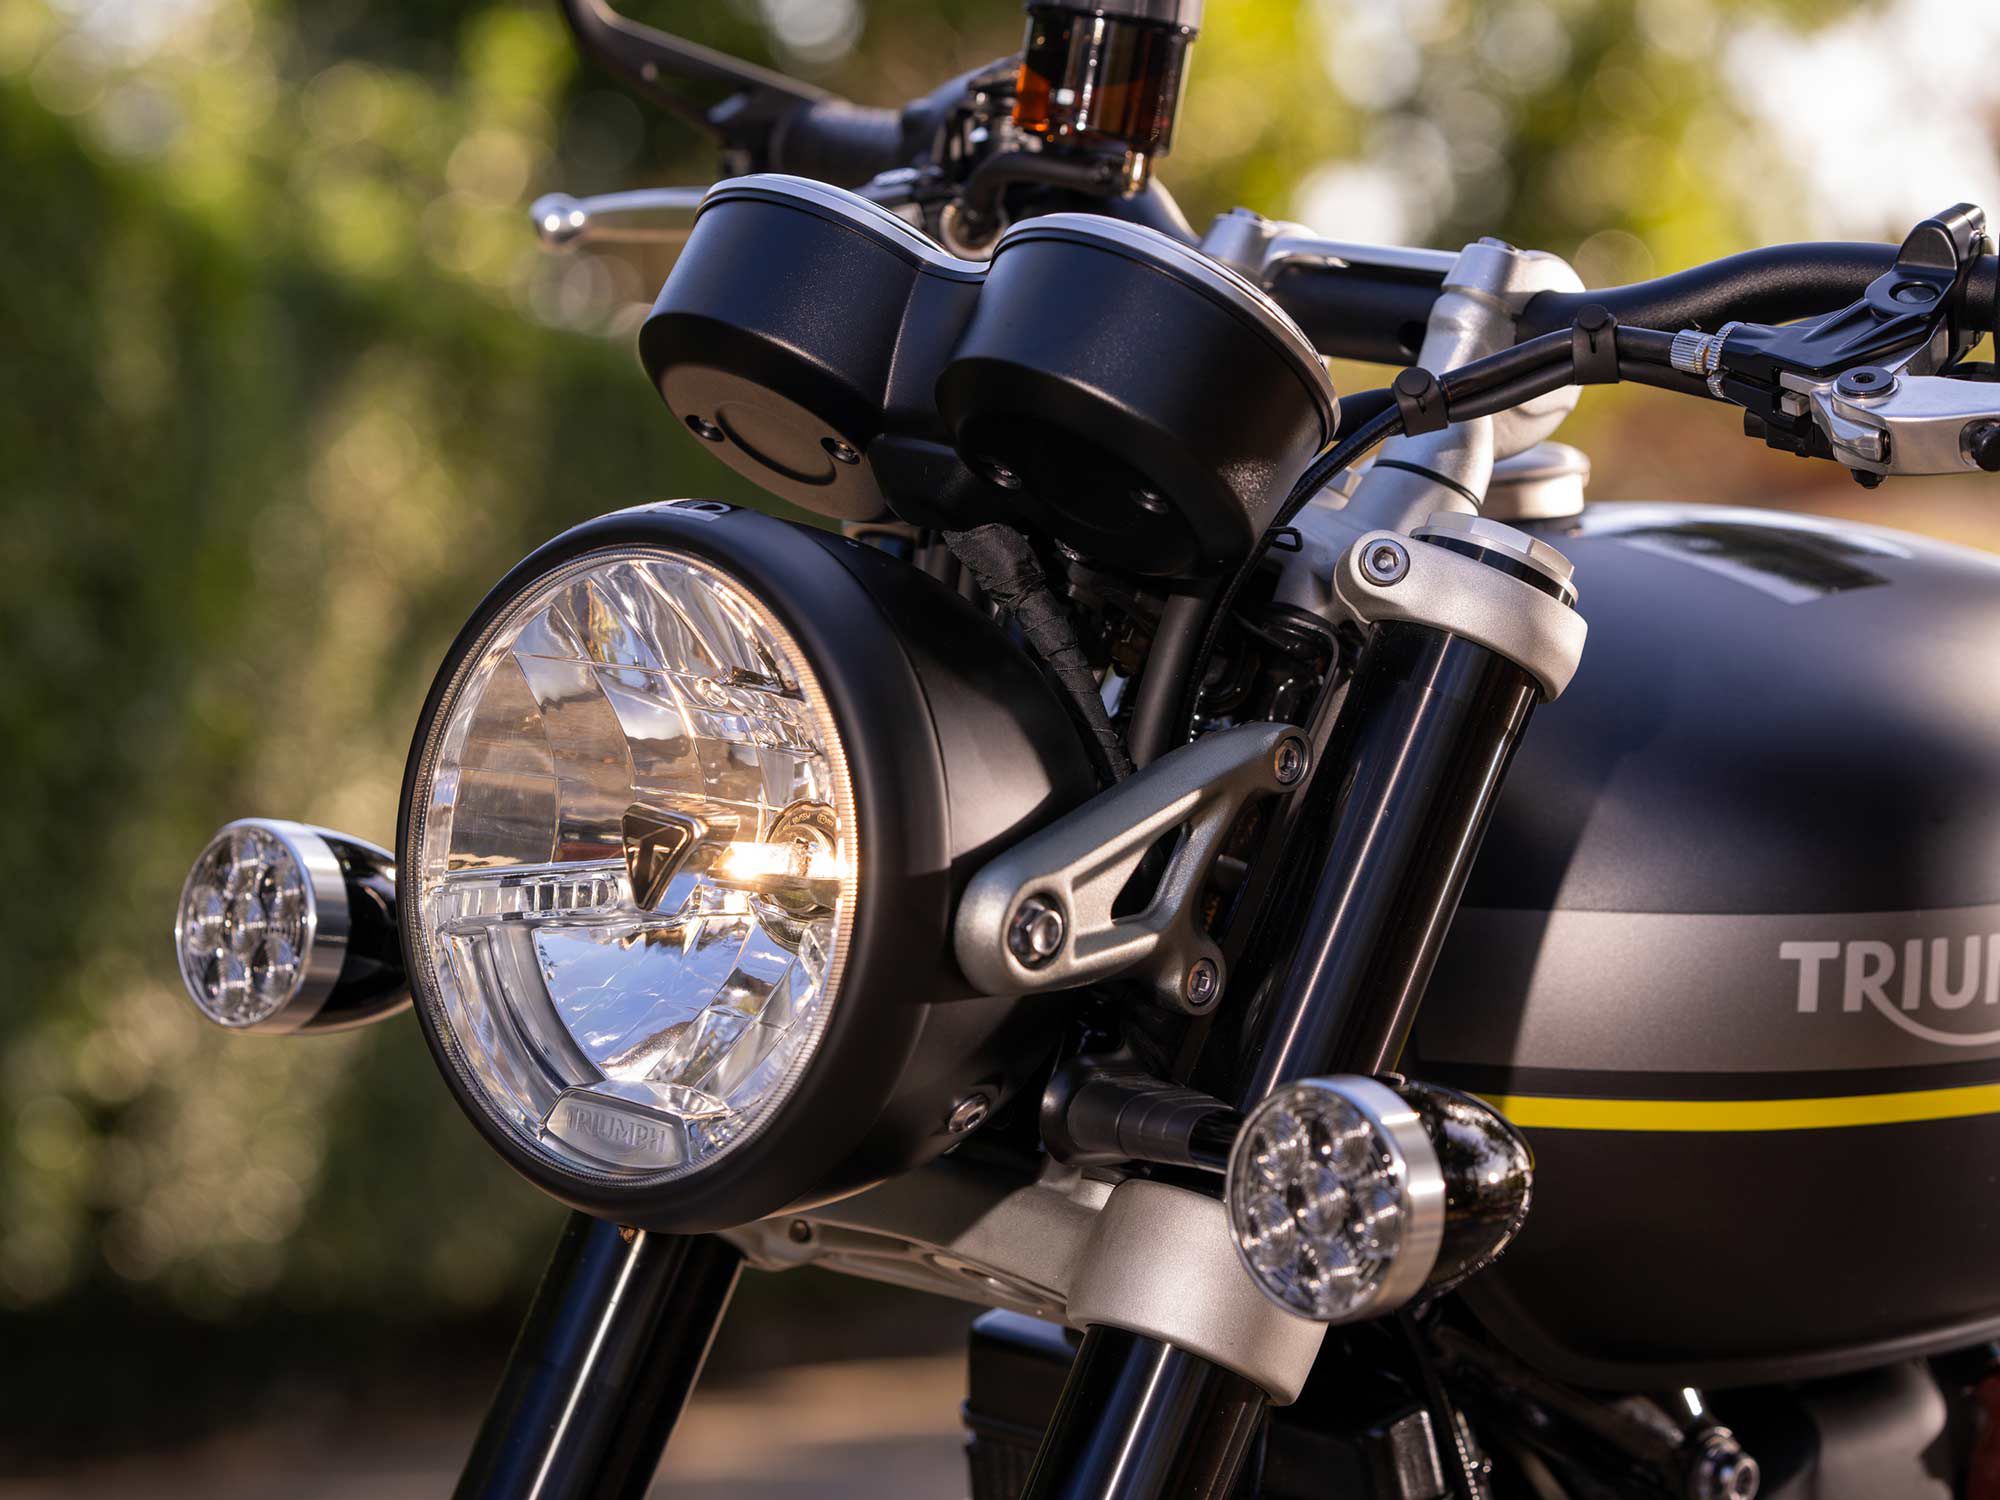 Although we appreciate its shape, the halogen headlamp is a miss for this $12,500 Speed Twin.